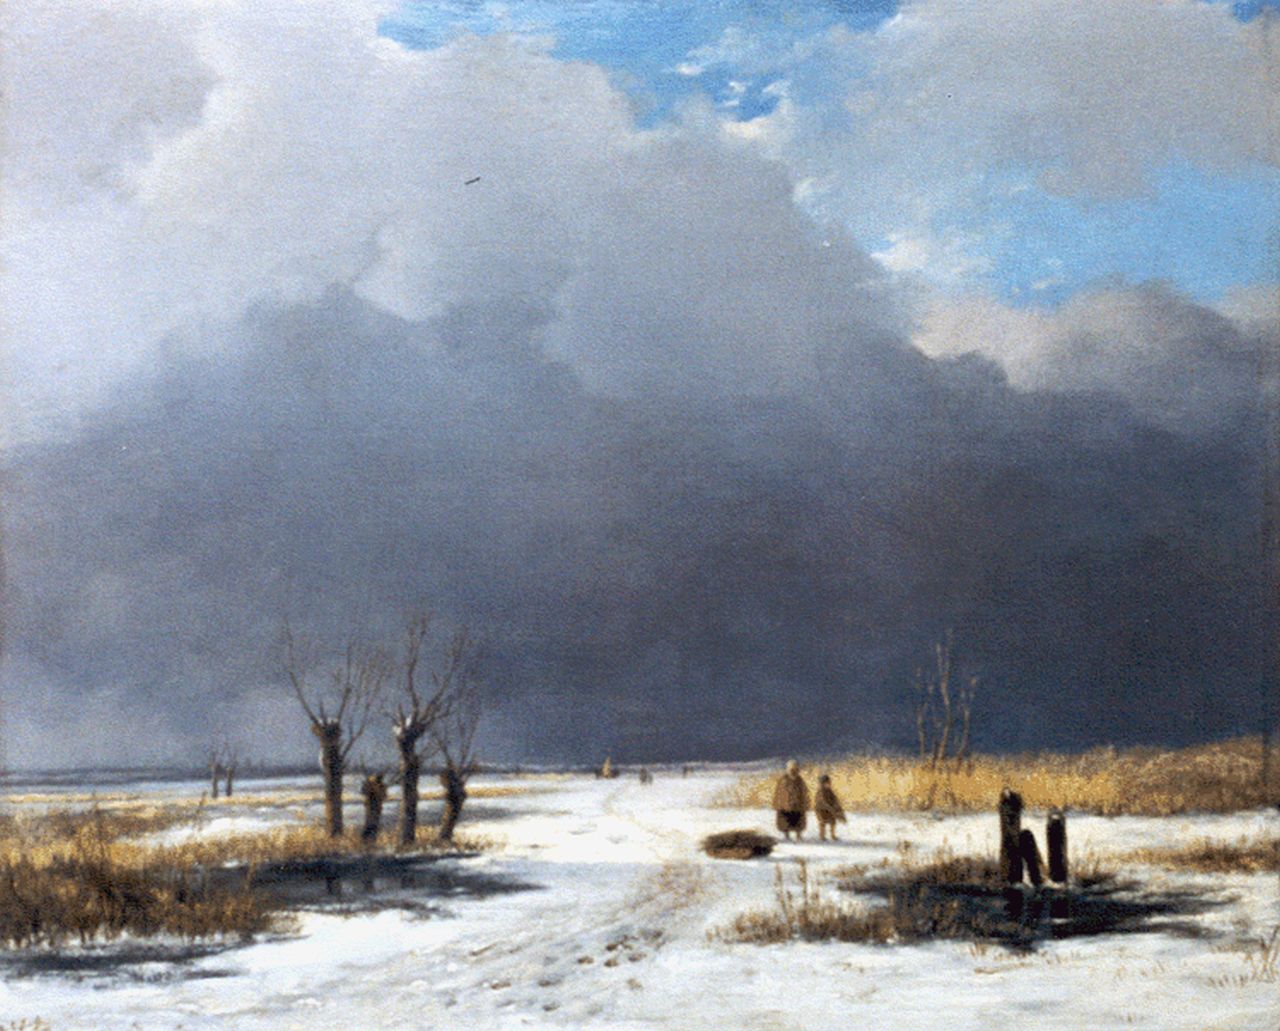 Bonifacius Cornelis Schneiders van Greyffenswerth | Figures in a winter landscape, oil on panel, 26.3 x 31.8 cm, signed l.l. with initials and dated 1834